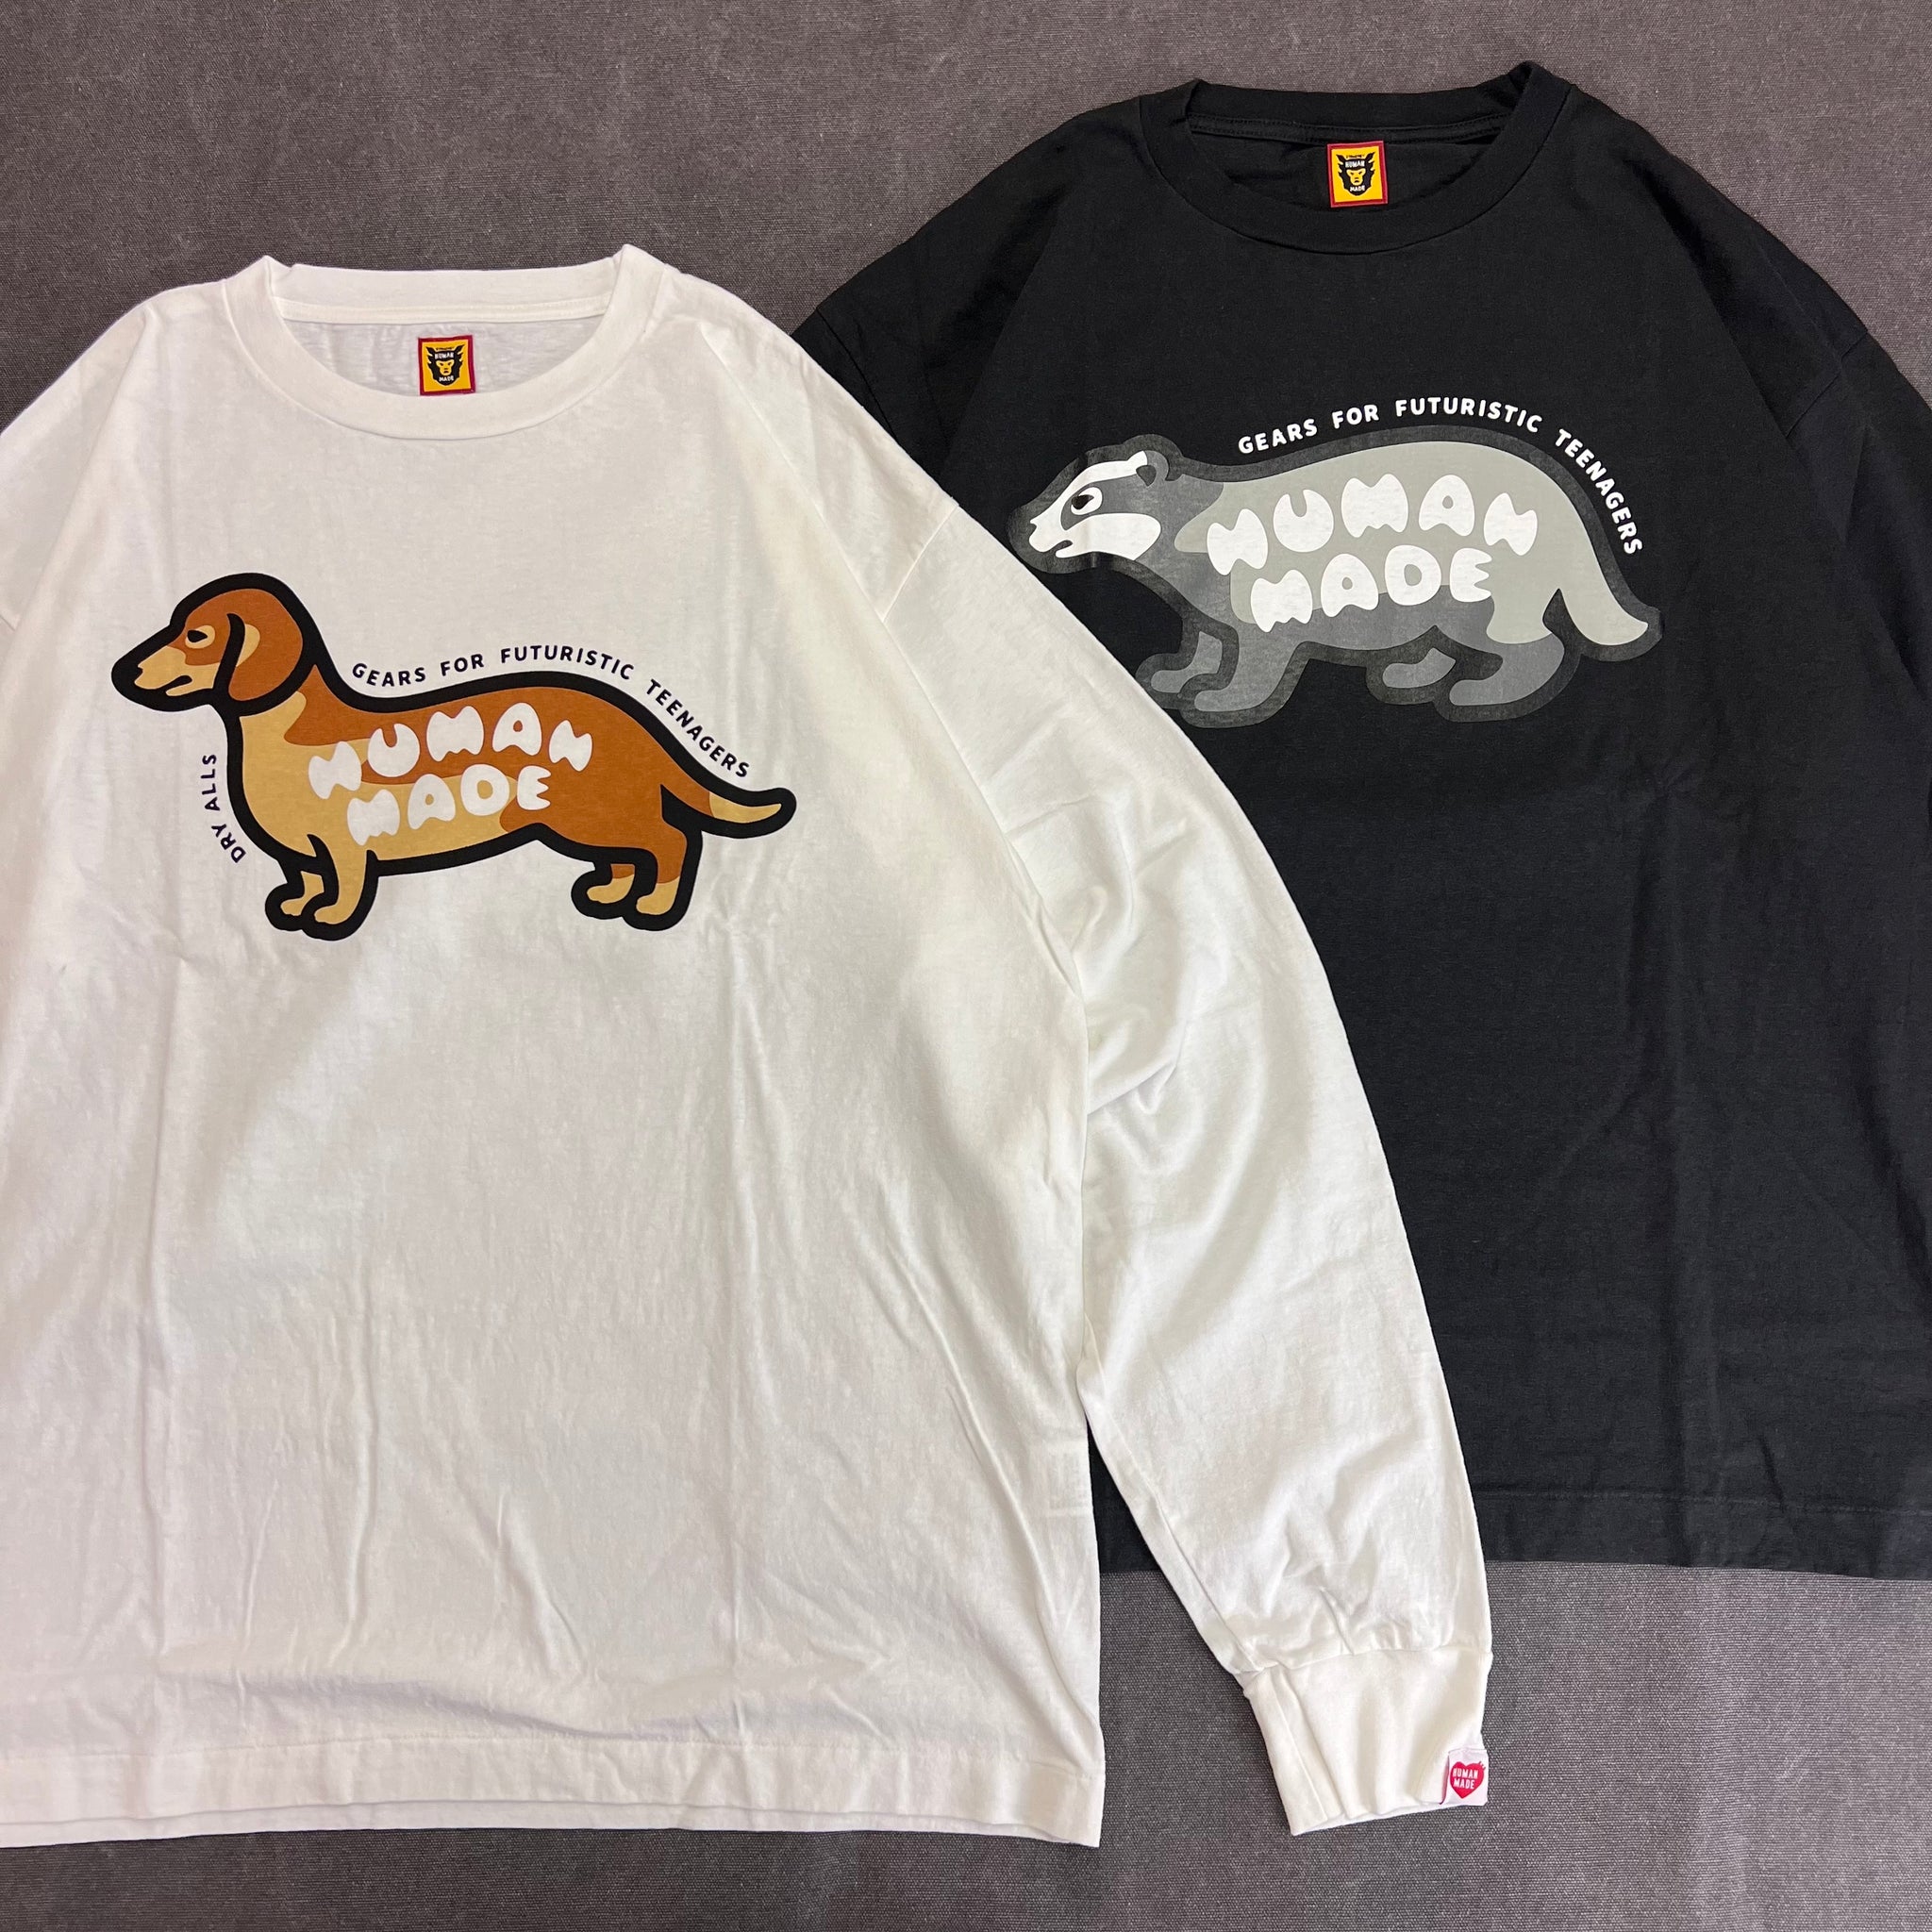 HUMAN MADE GRAPHIC L/S T-SHIRT #2